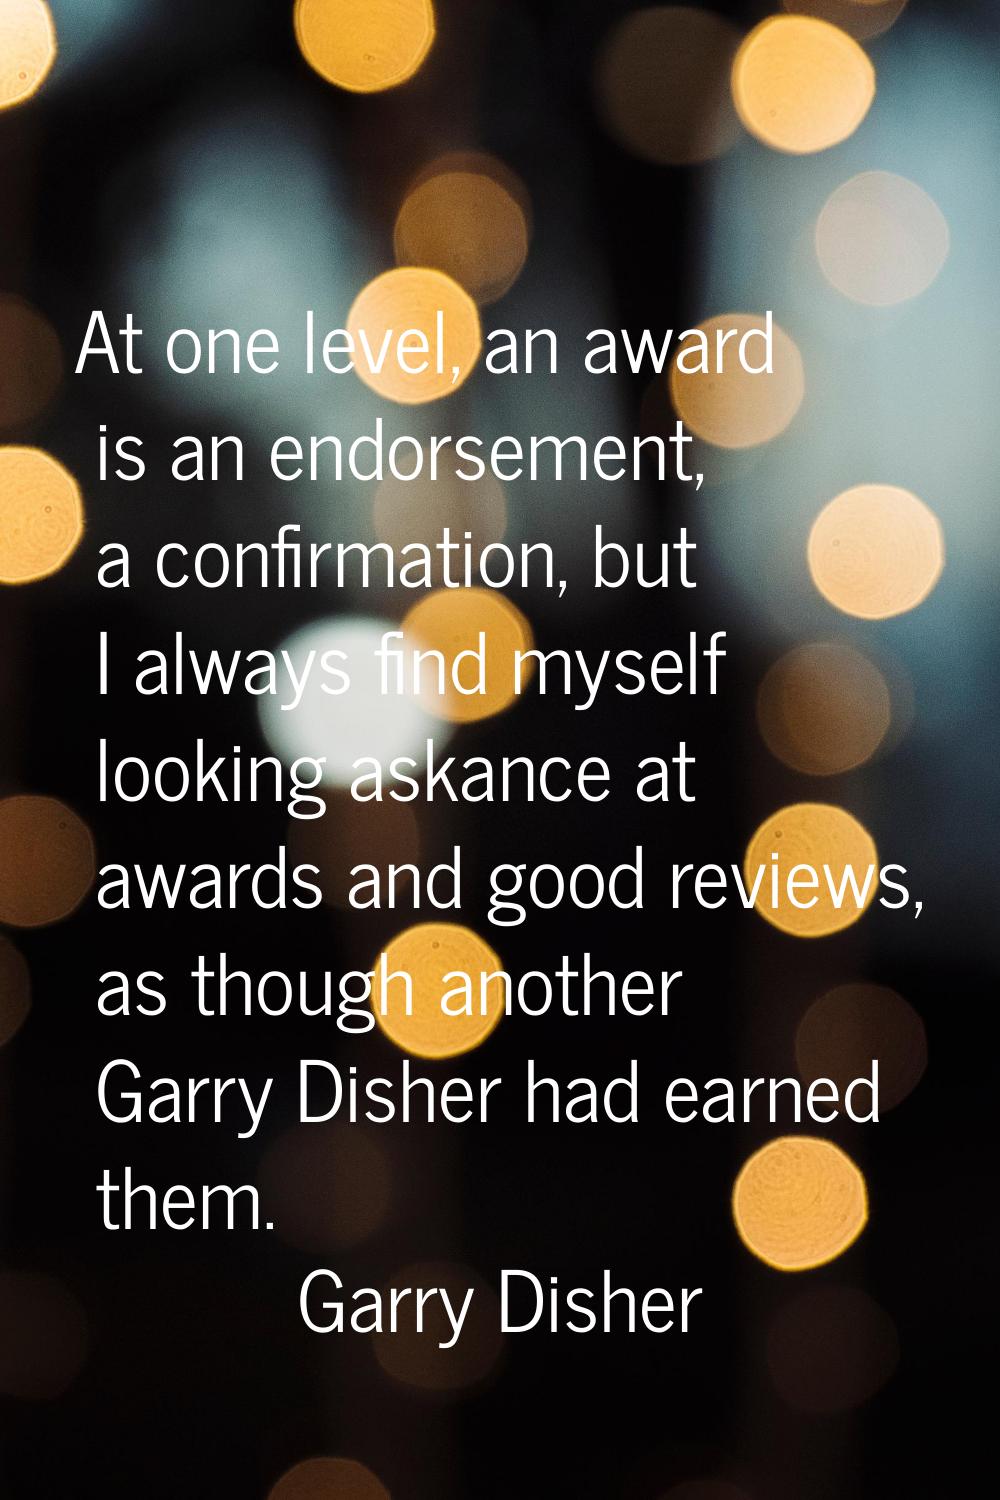 At one level, an award is an endorsement, a confirmation, but I always find myself looking askance 